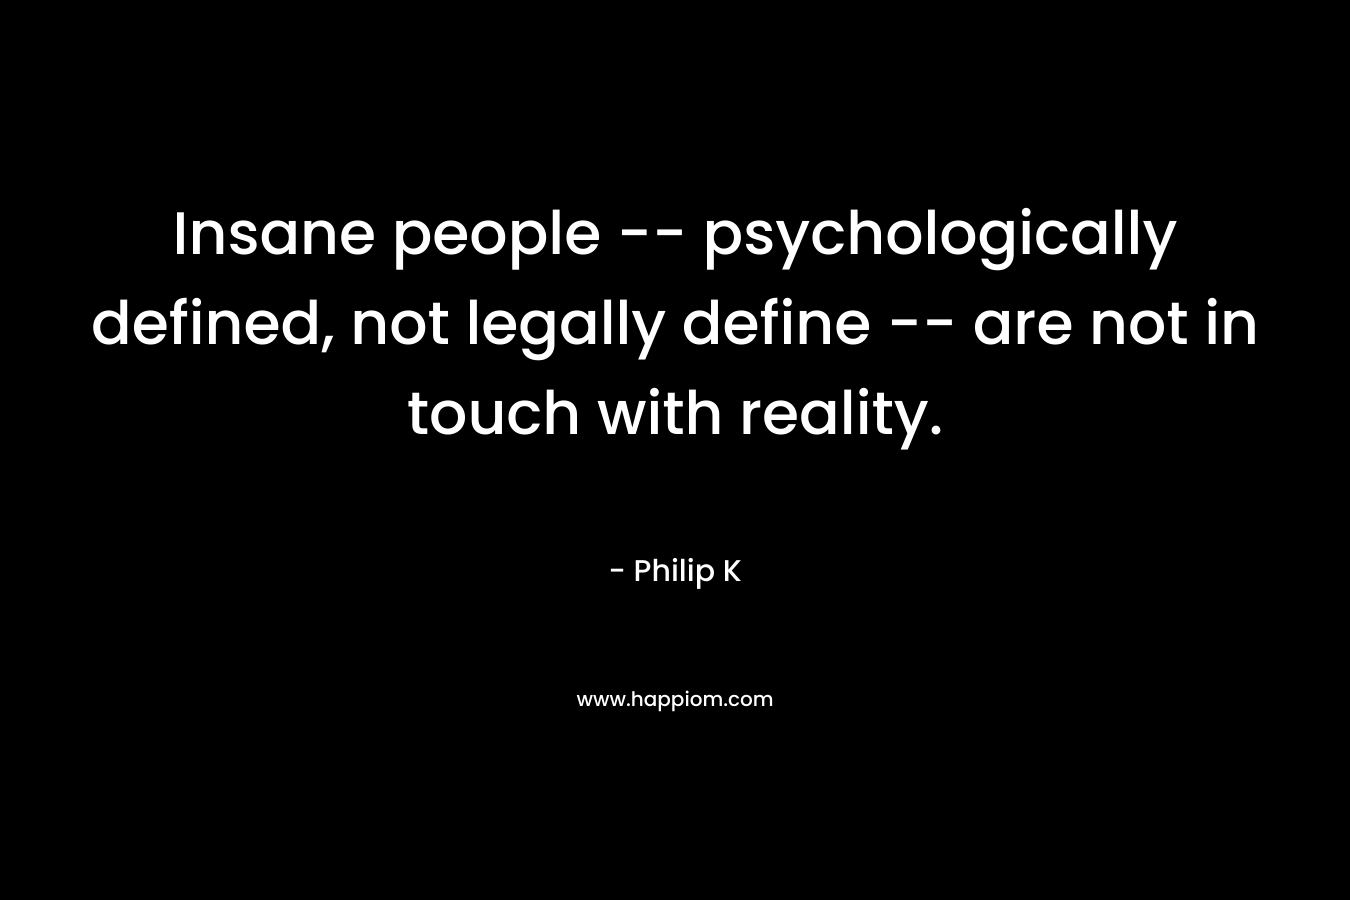 Insane people -- psychologically defined, not legally define -- are not in touch with reality.